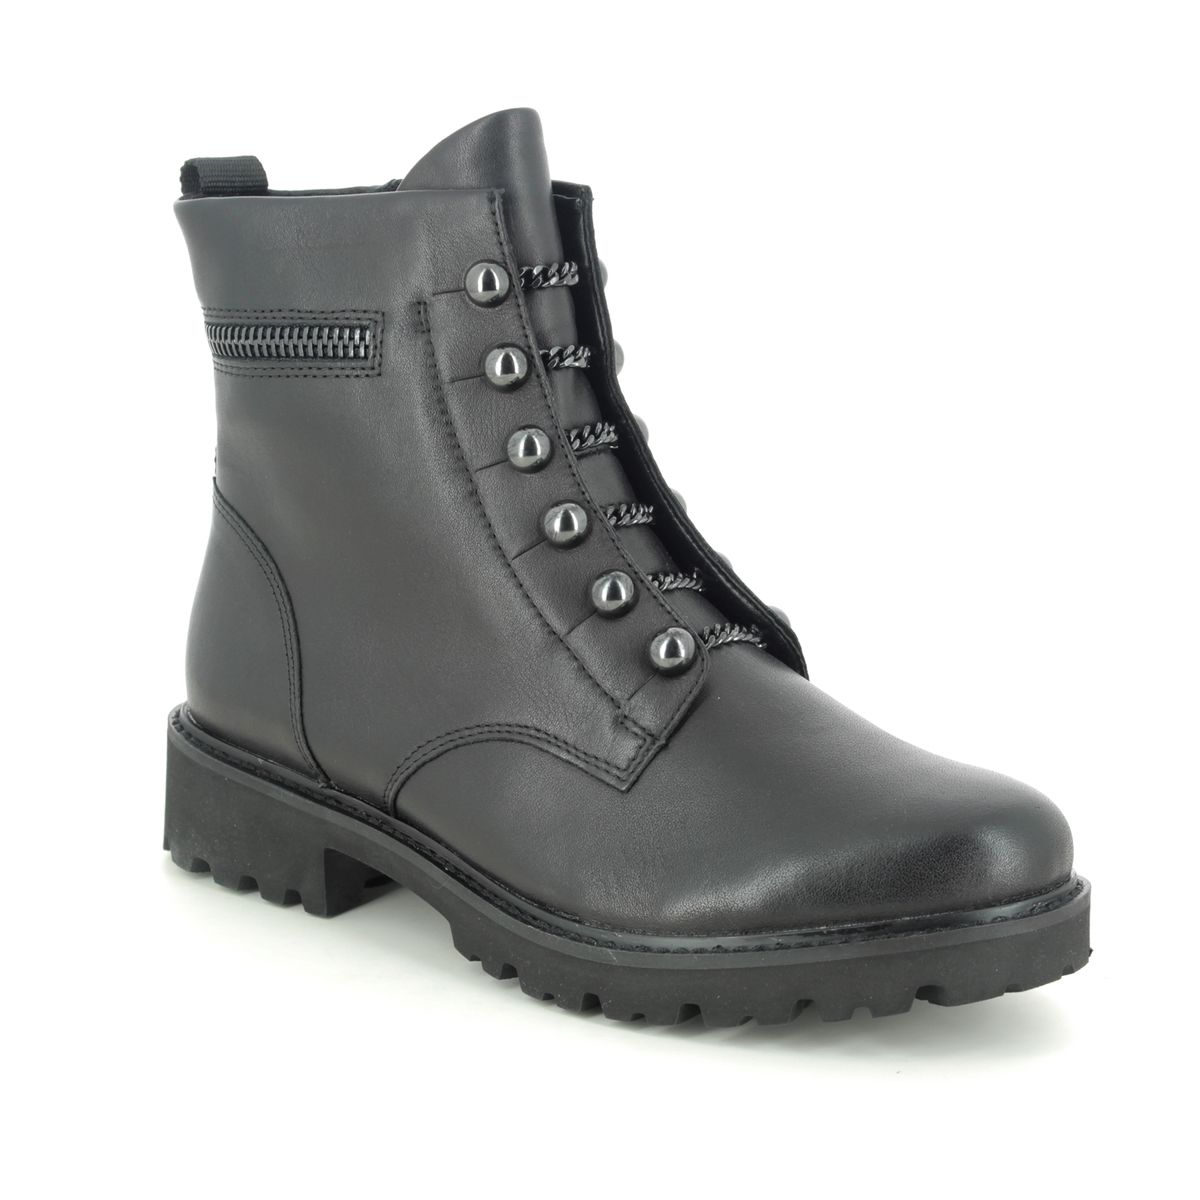 Remonte Docland Black Leather Womens Biker Boots D8670-01 In Size 42 In Plain Black Leather